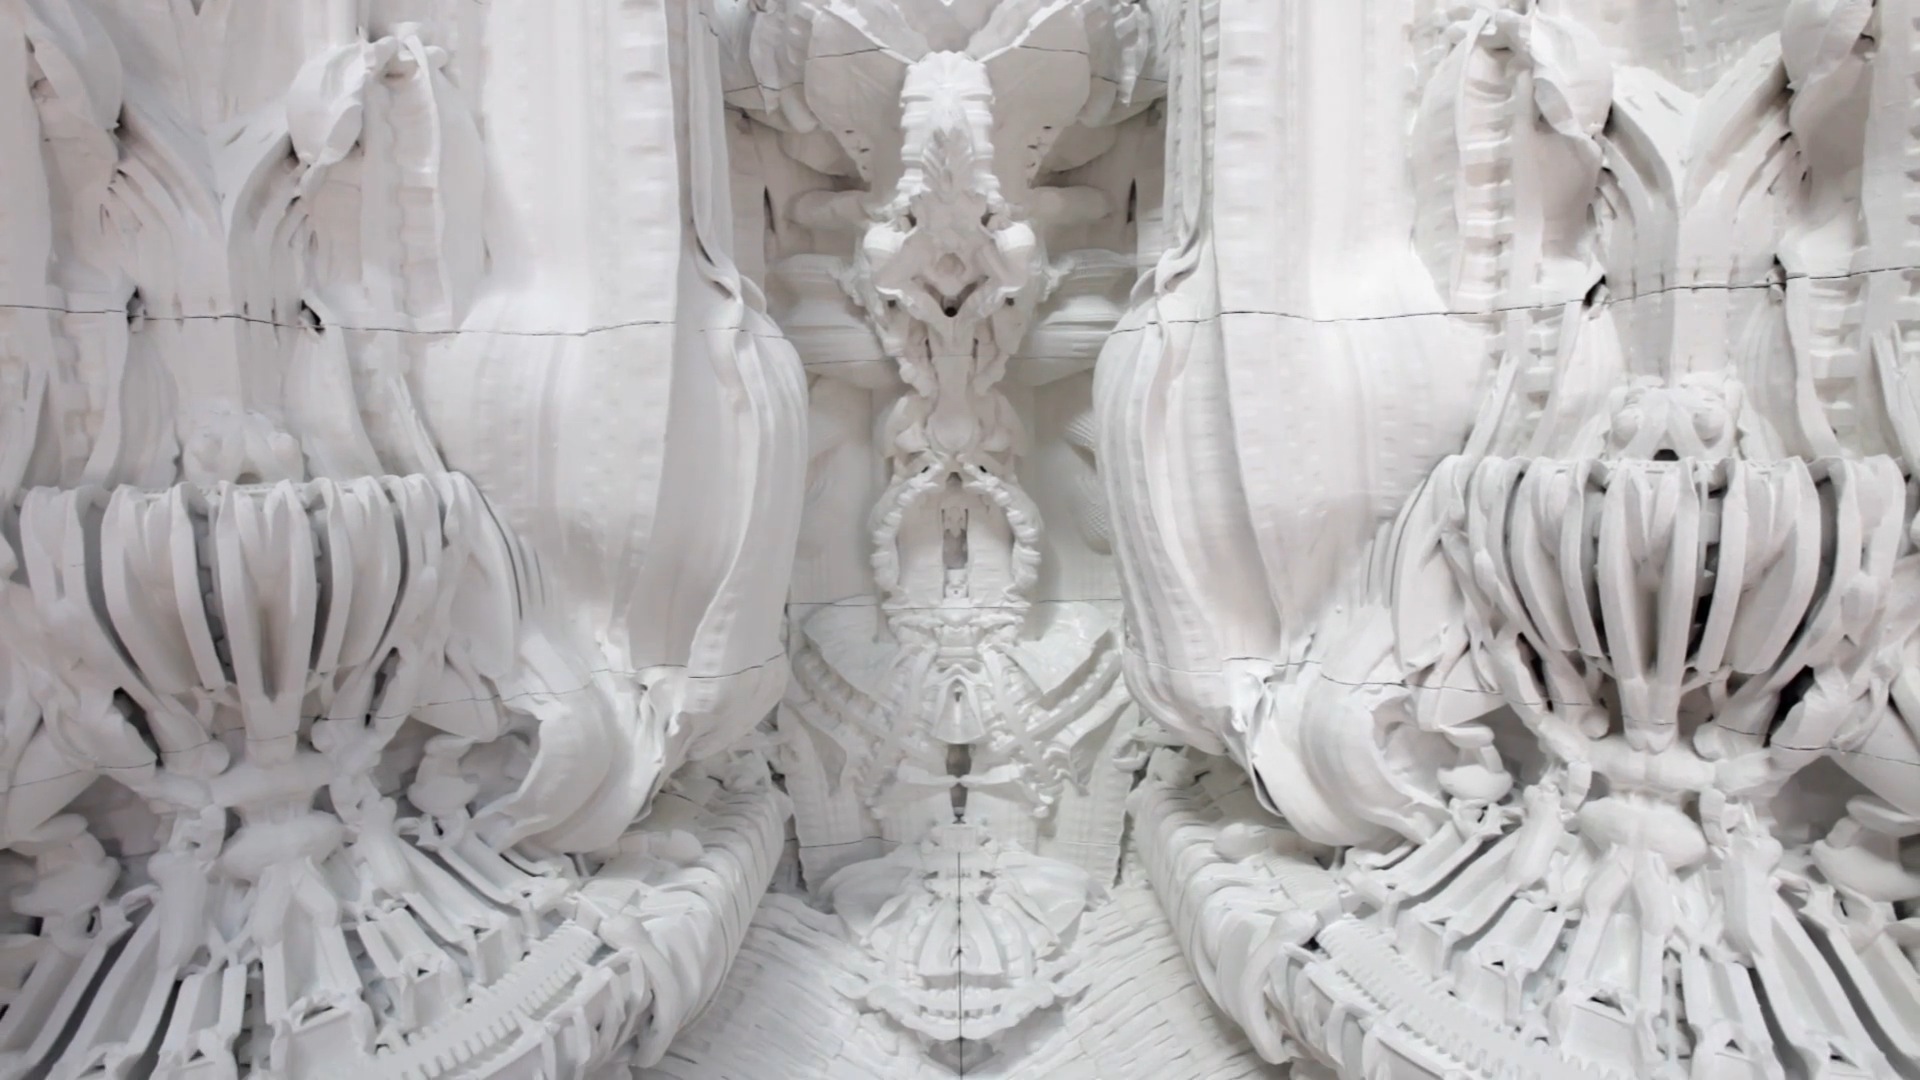 Digital Grotesque 3D Printing Architecture